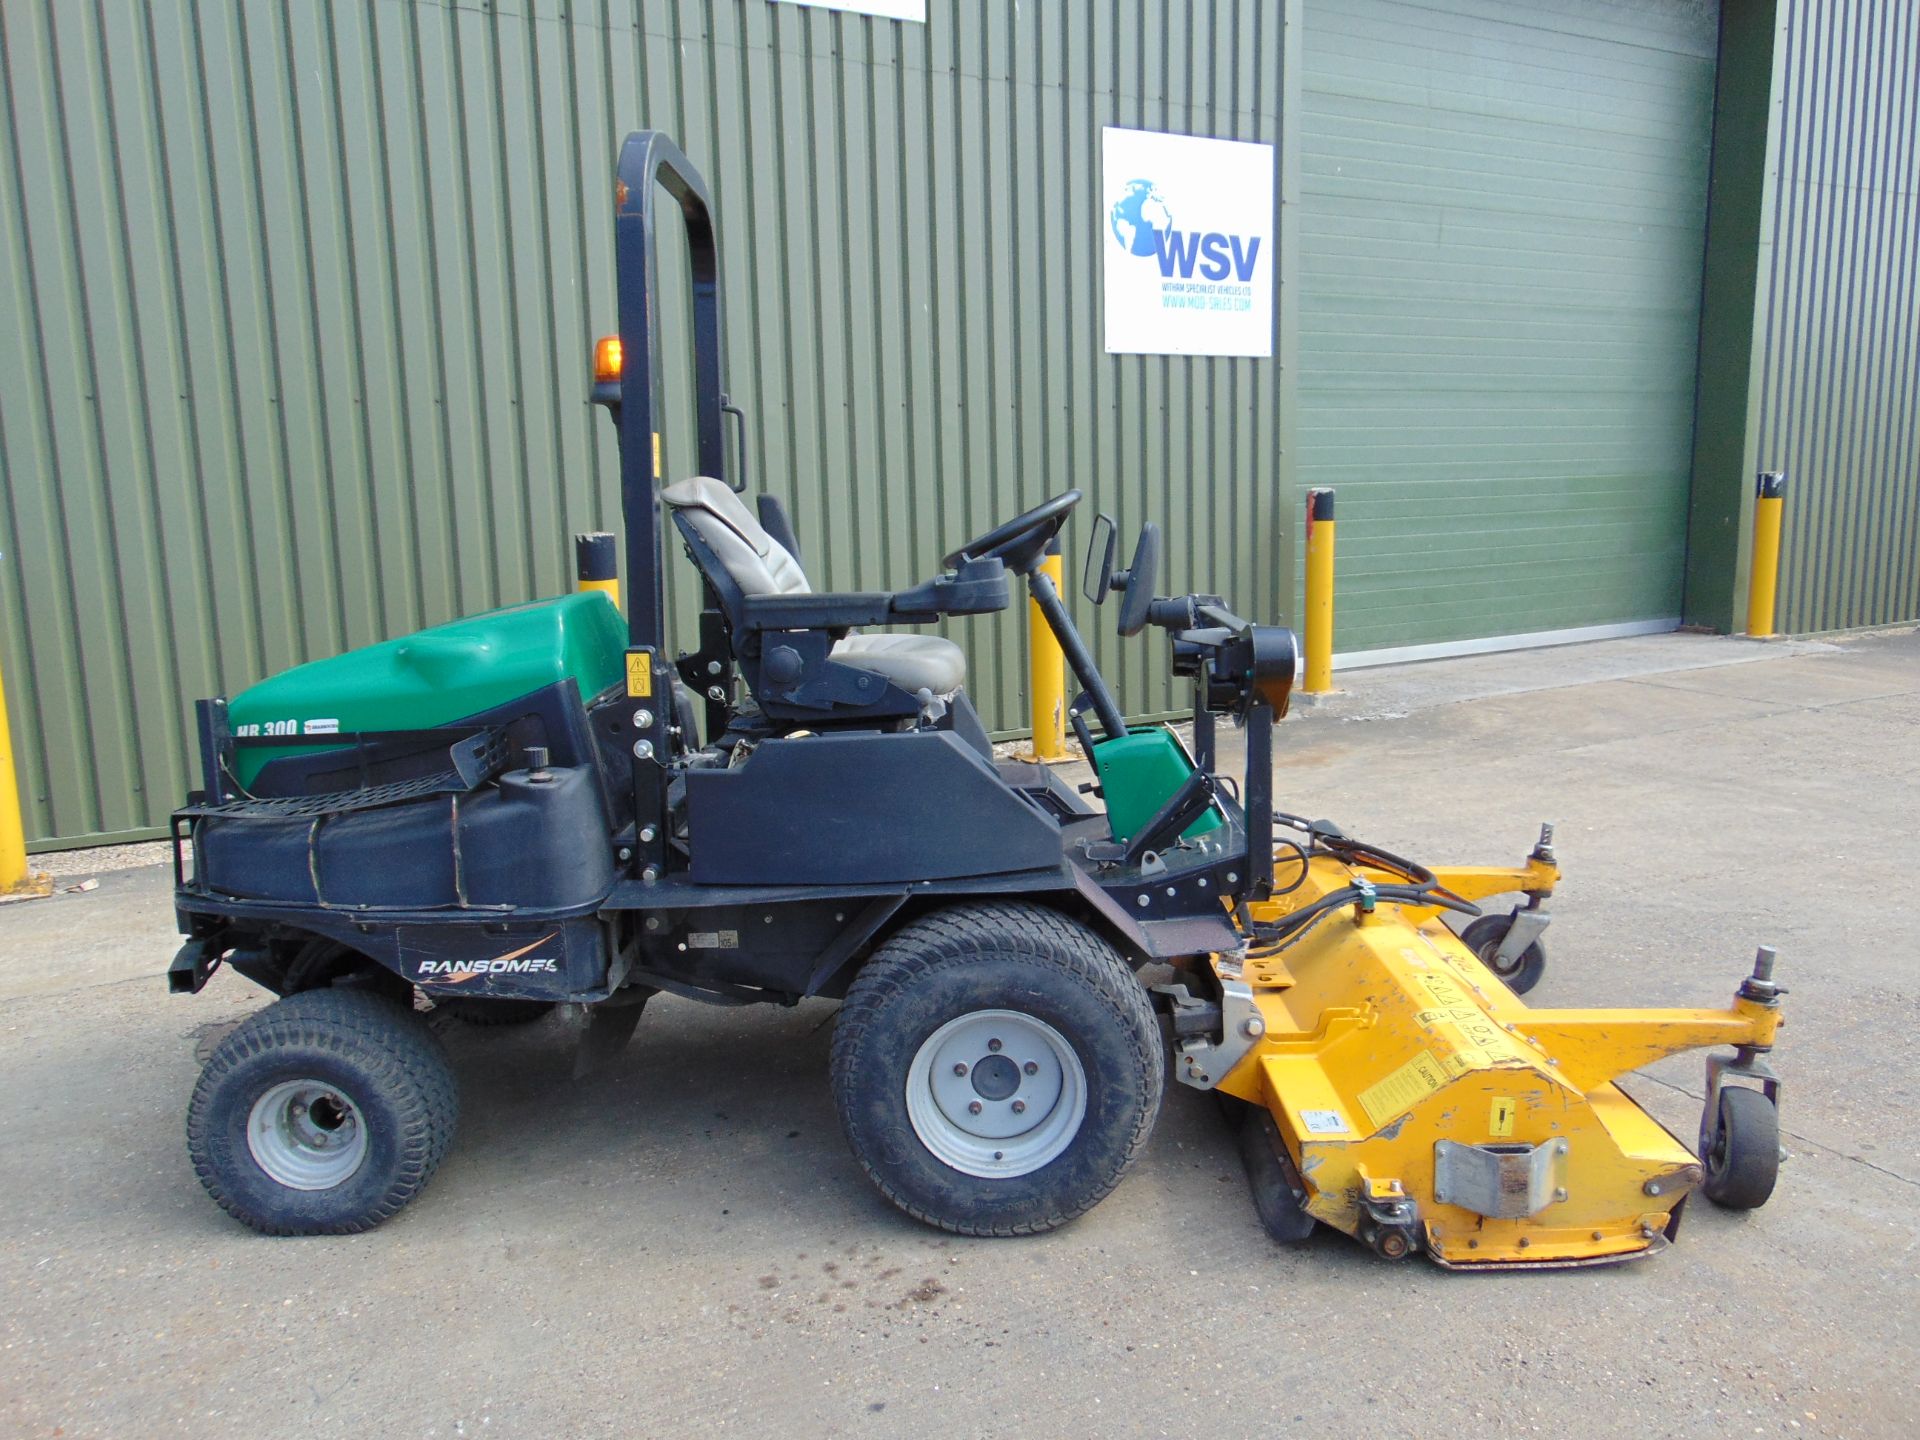 2014 Ransomes HR300 C/W Muthing Outfront Flail Mower ONLY 3,489 Hours! - Image 9 of 22